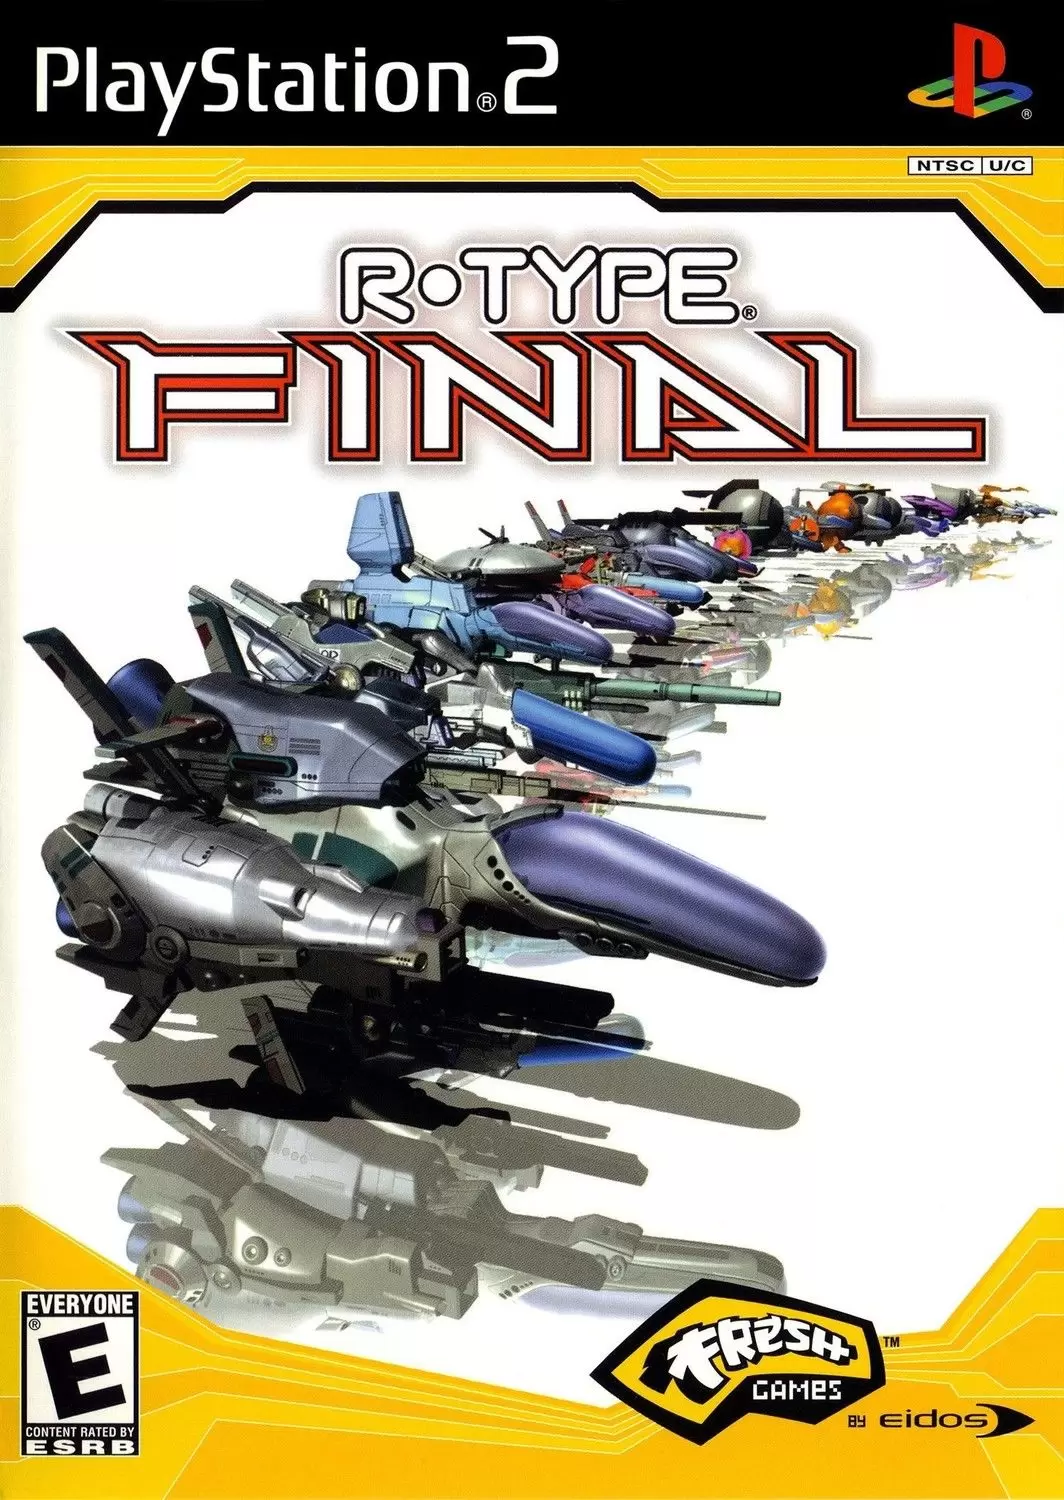 PS2 Games - R-Type Final